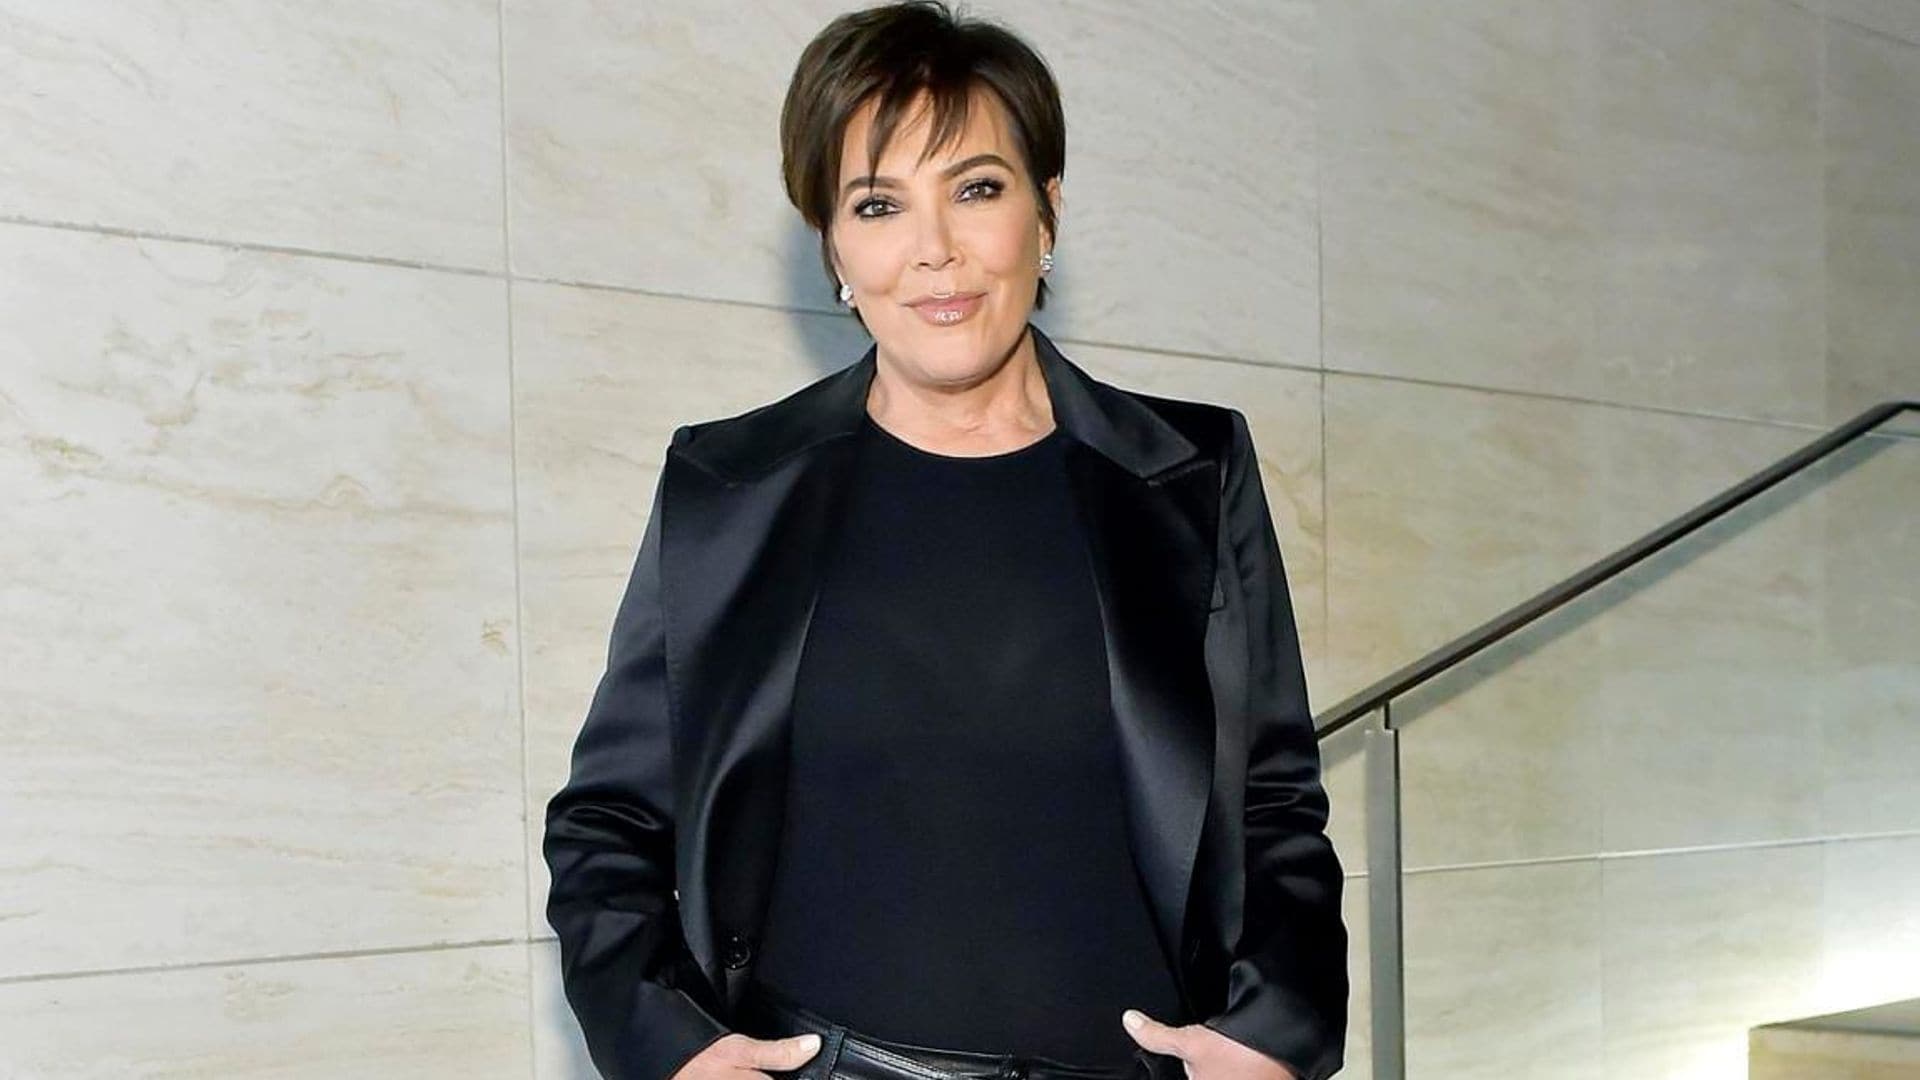 The beautiful messages Kris Jenner received for her 65th birthday